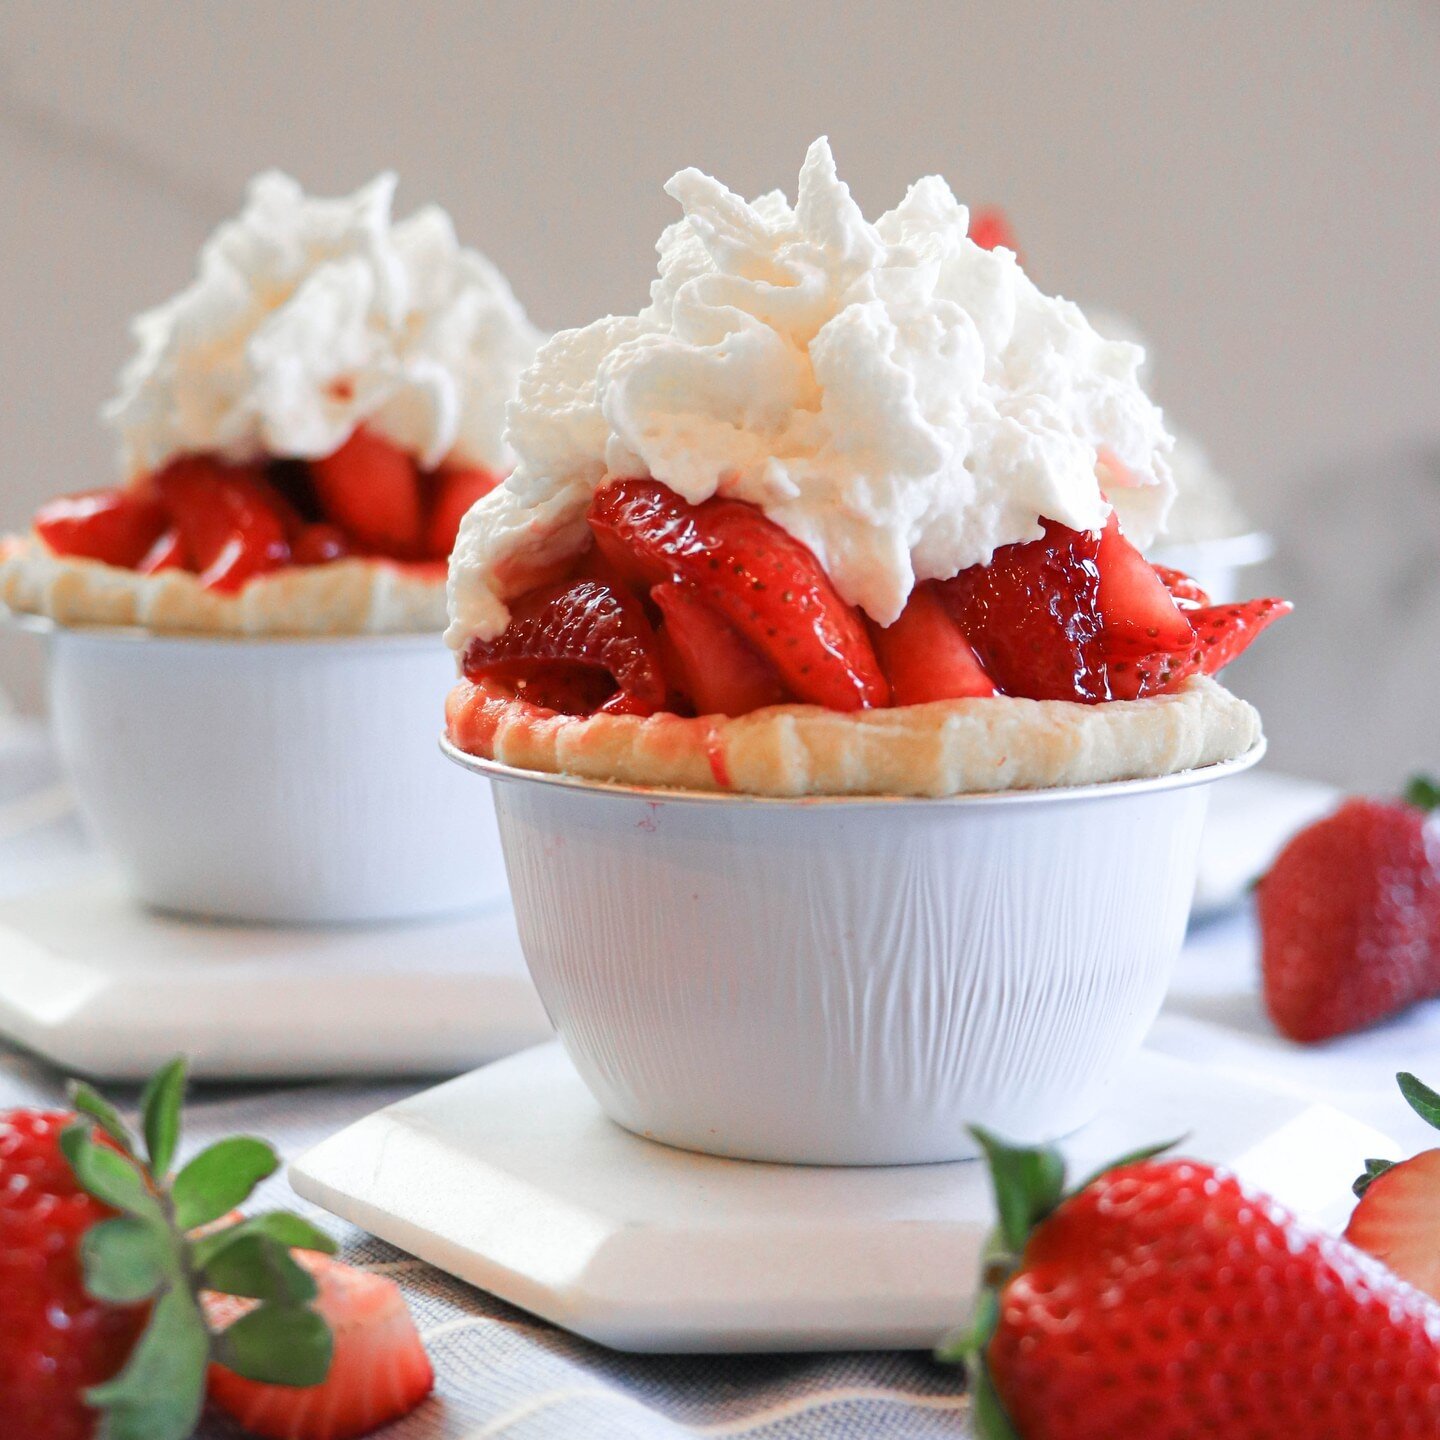 Treat mom to a little something sweet this Mother's Day! 🍓🥧
Strawberry Shortpie available 5/12-5/14 only!